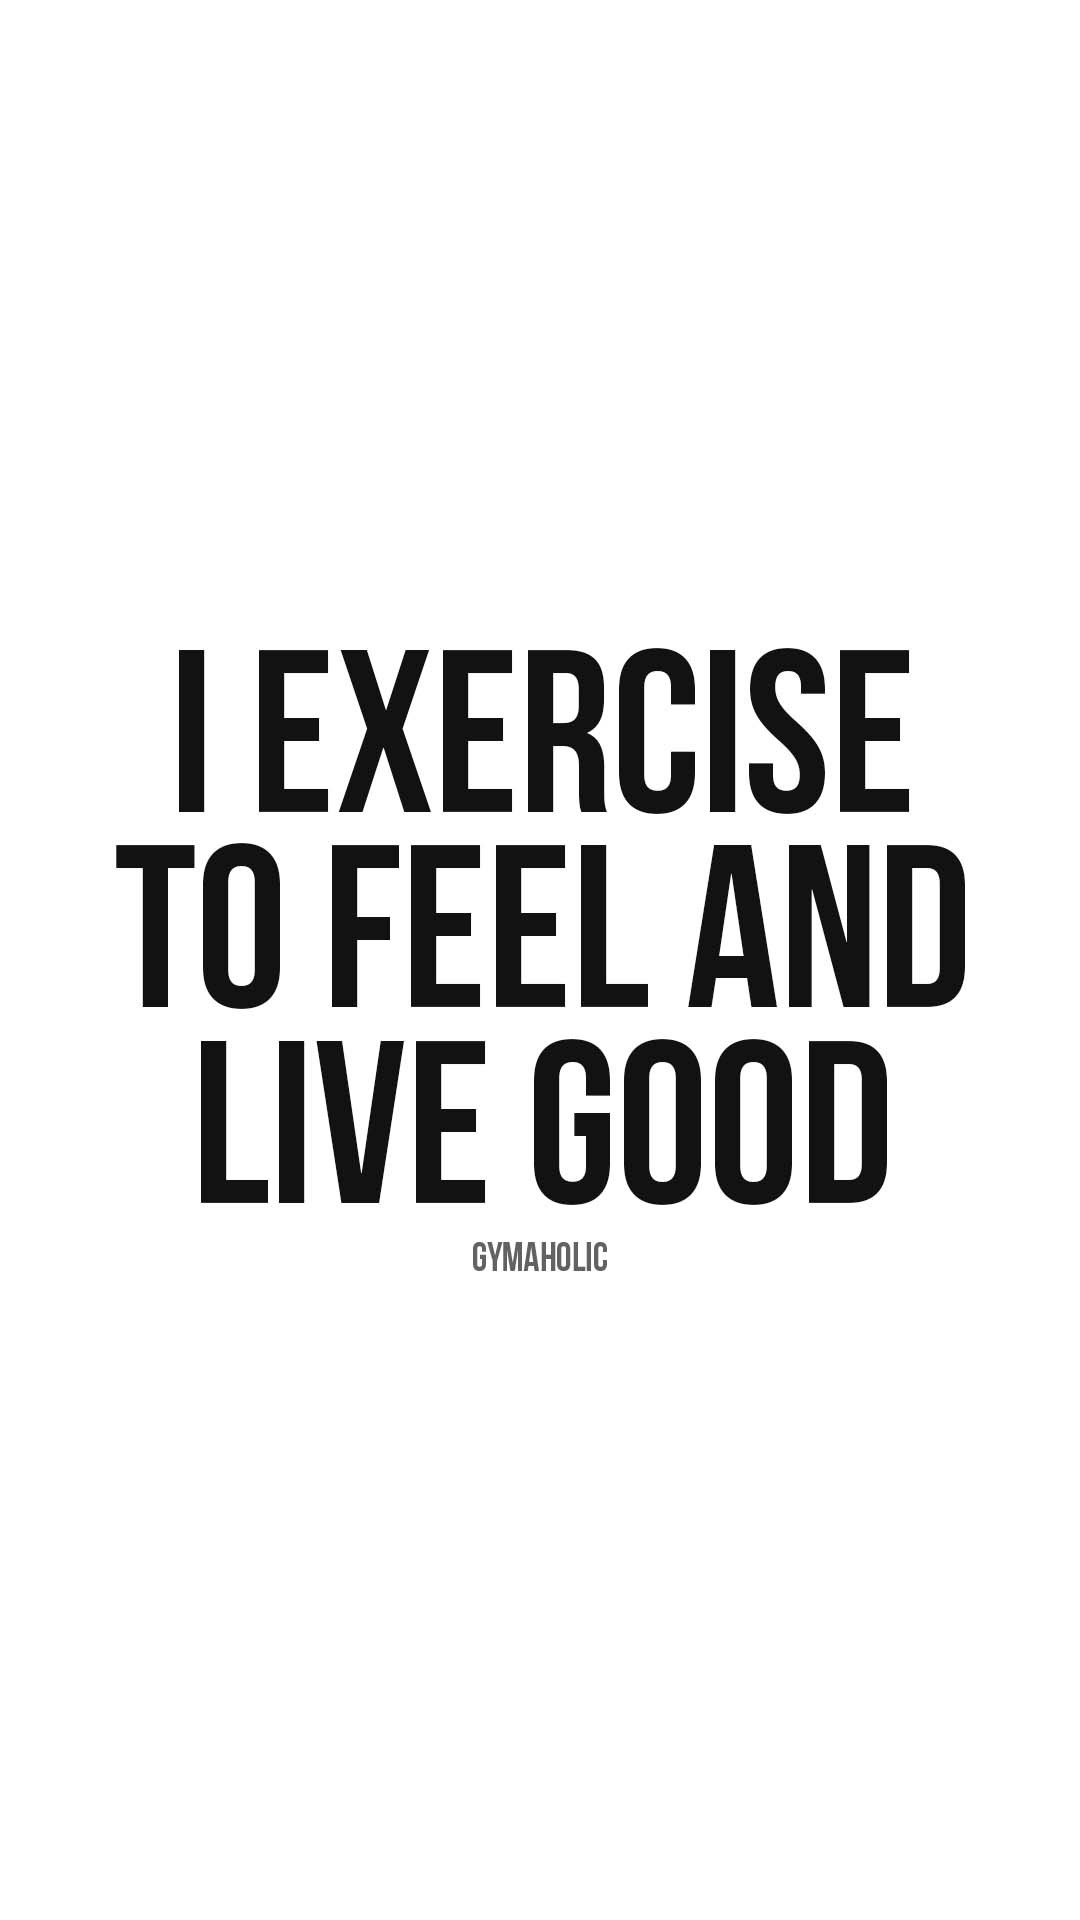 I exercise to feel and live good